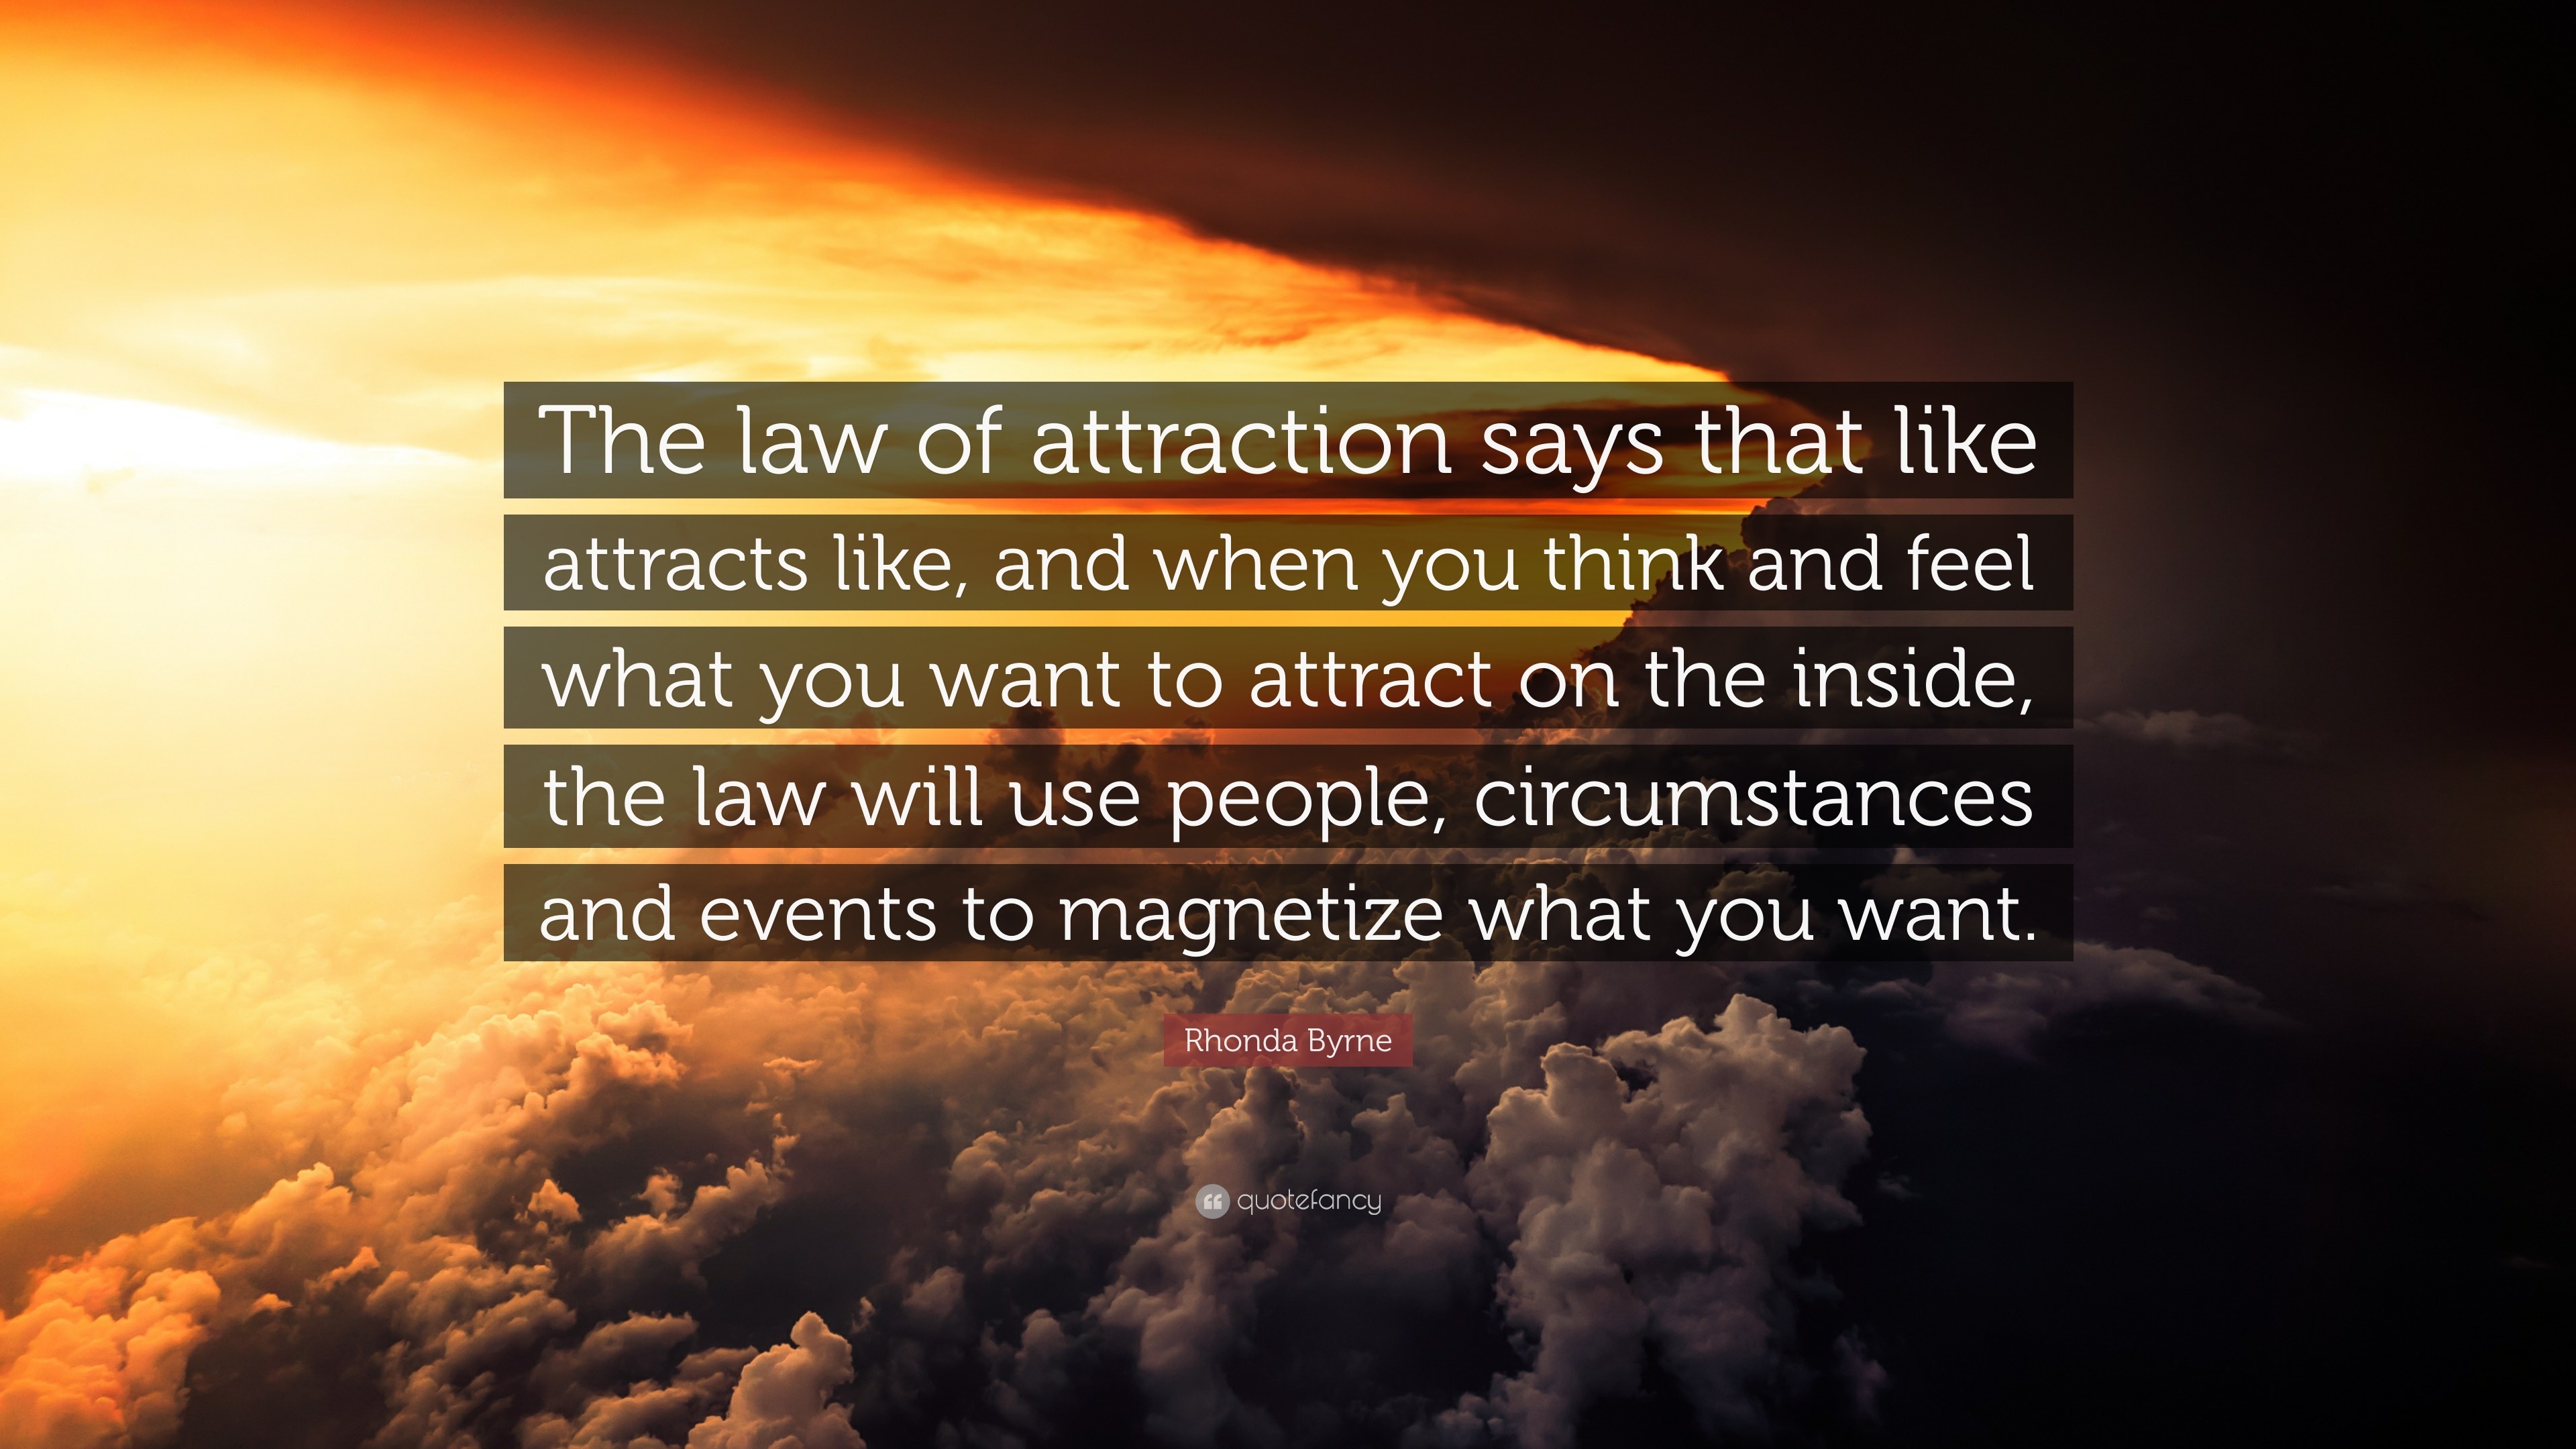 Rhonda Byrne Quote: “The law of attraction says that like attracts like